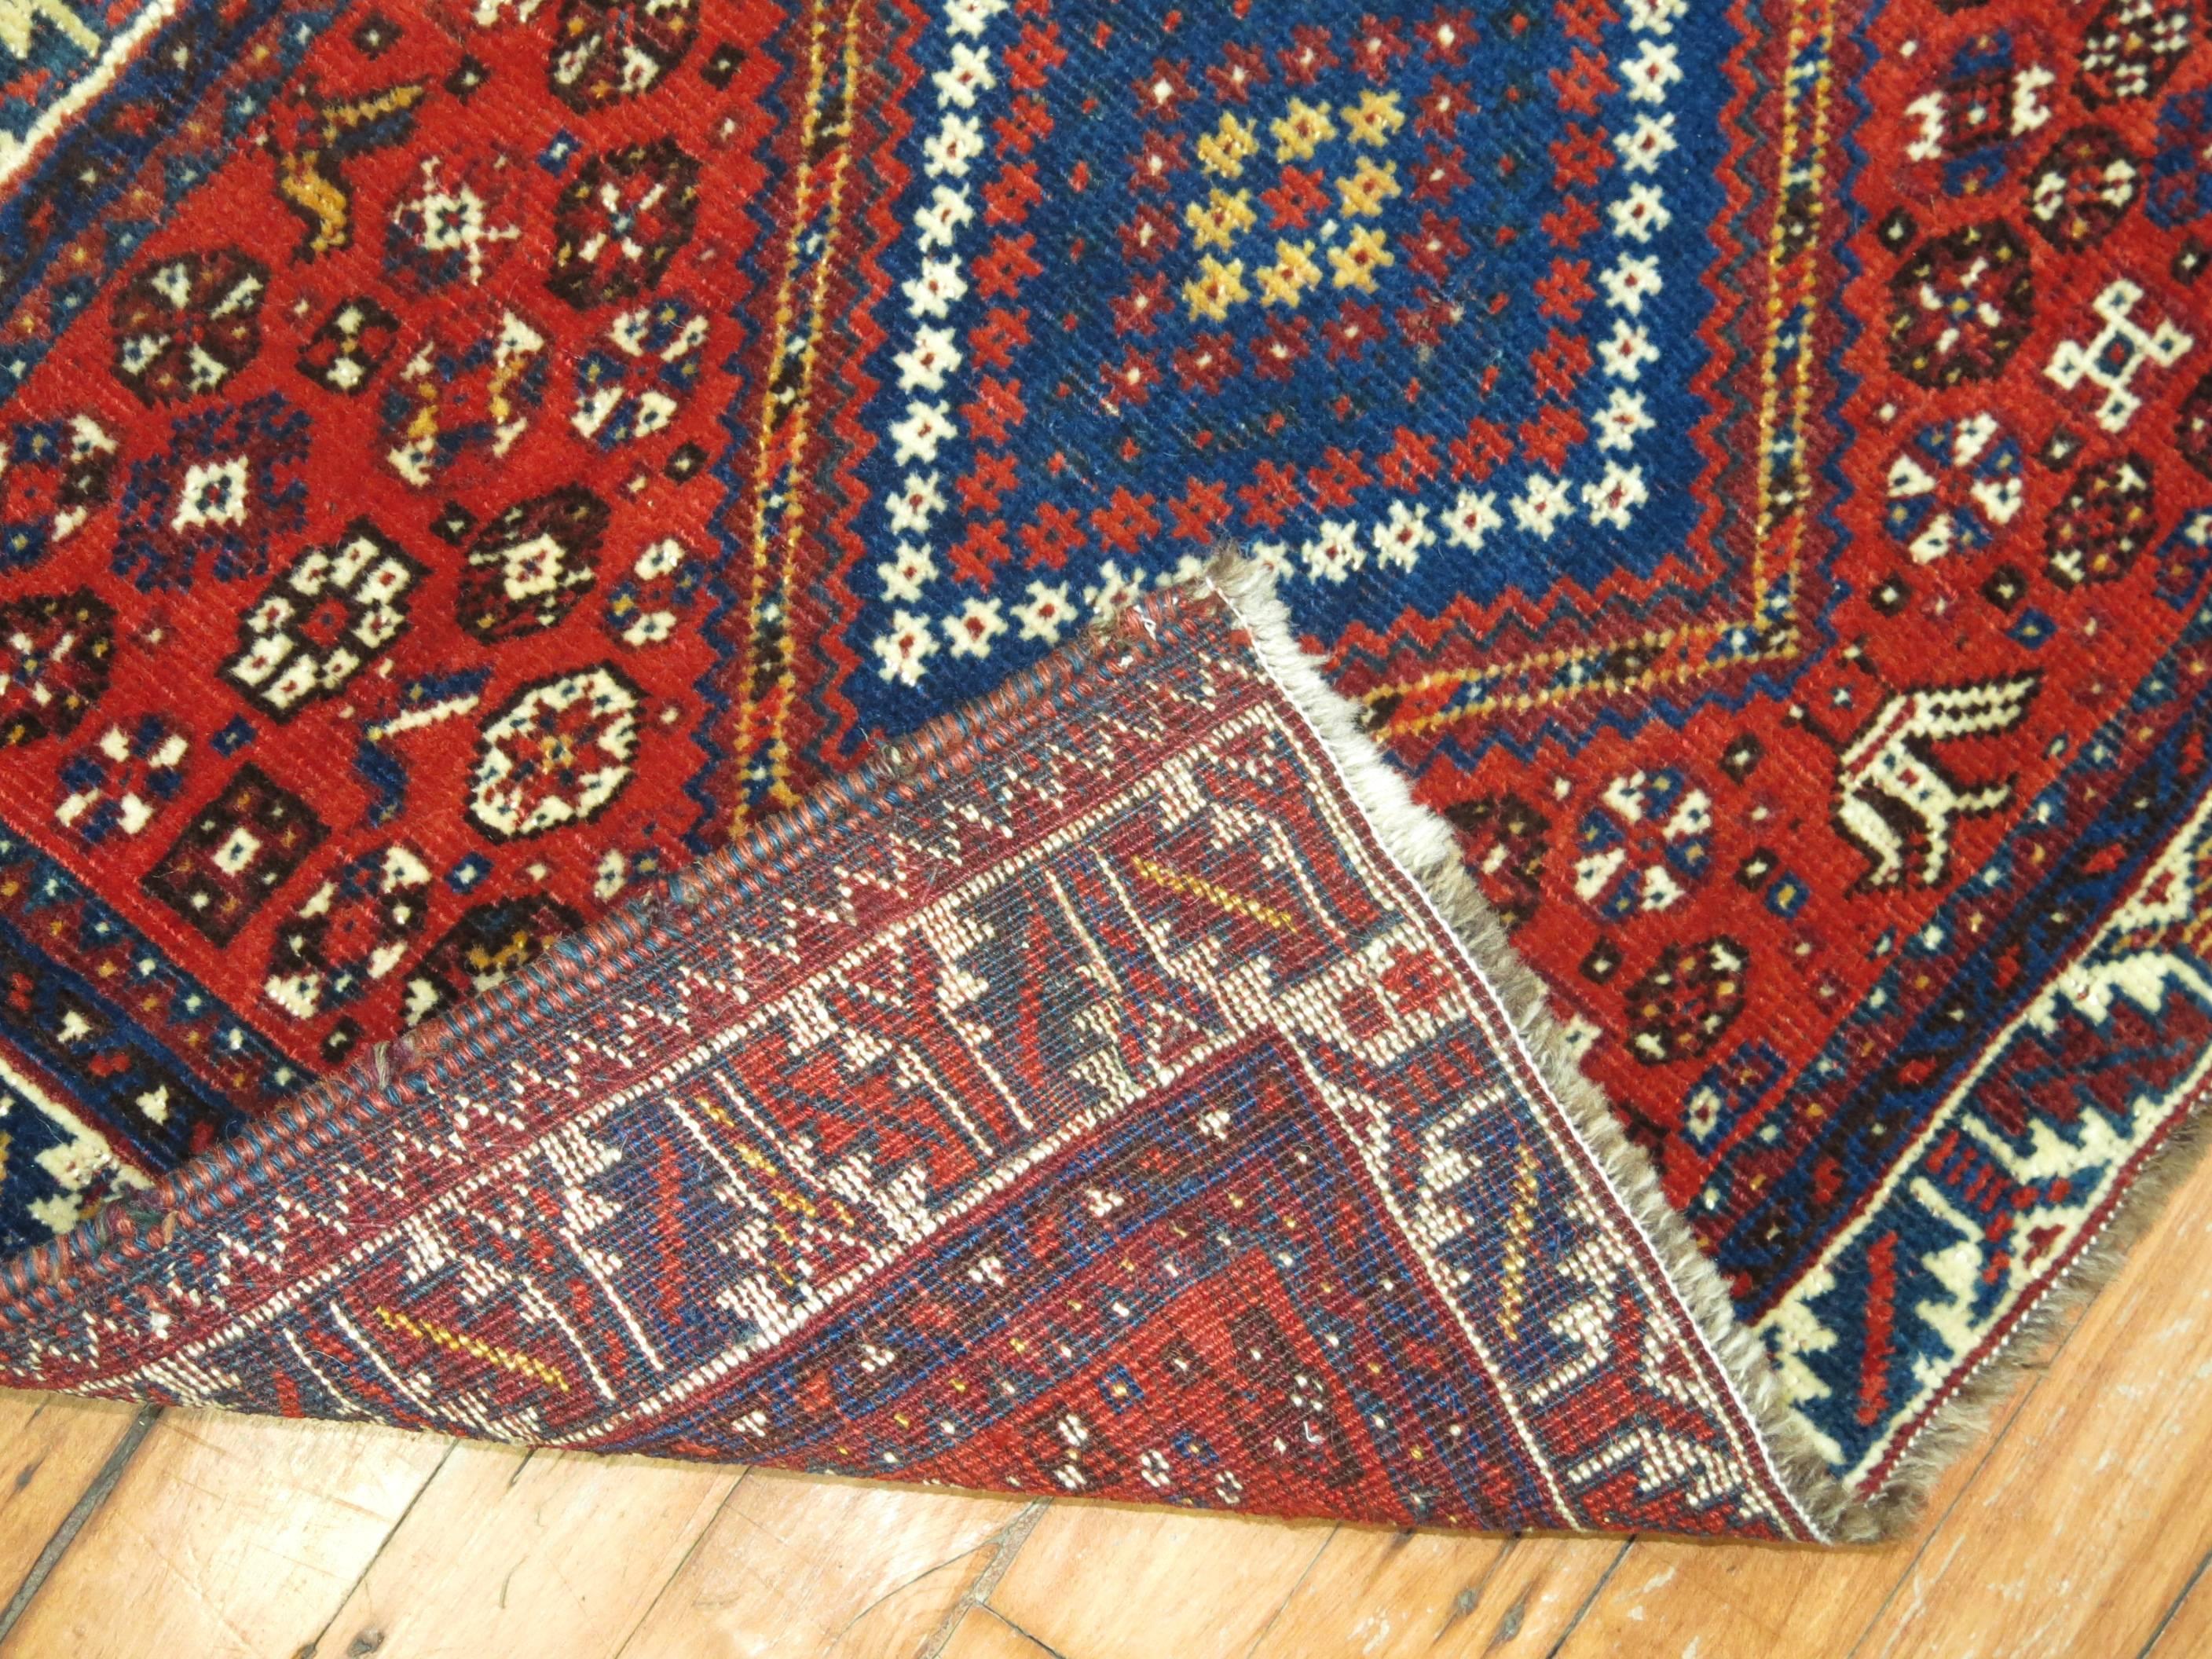 Hand-Knotted Tribal Red Blue Antique Persian Rug Mat